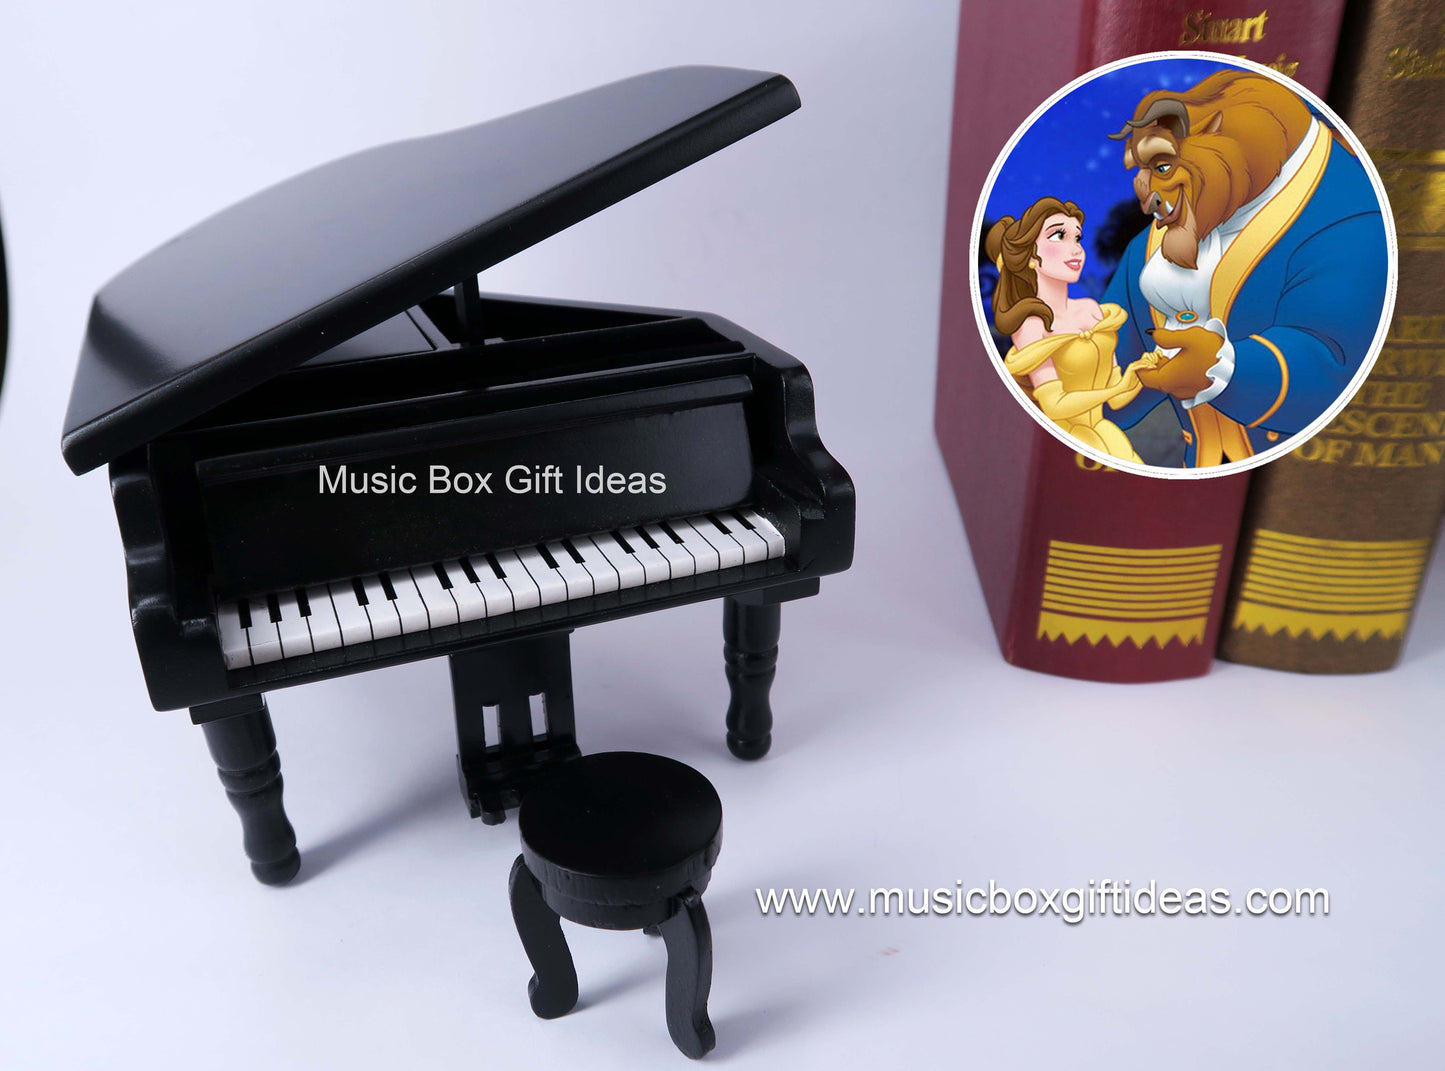 Disney Beauty and The Beast Tale as Old As Time 18-Note Music Box Gift (Wooden Black Piano) - Music Box Gift Ideas